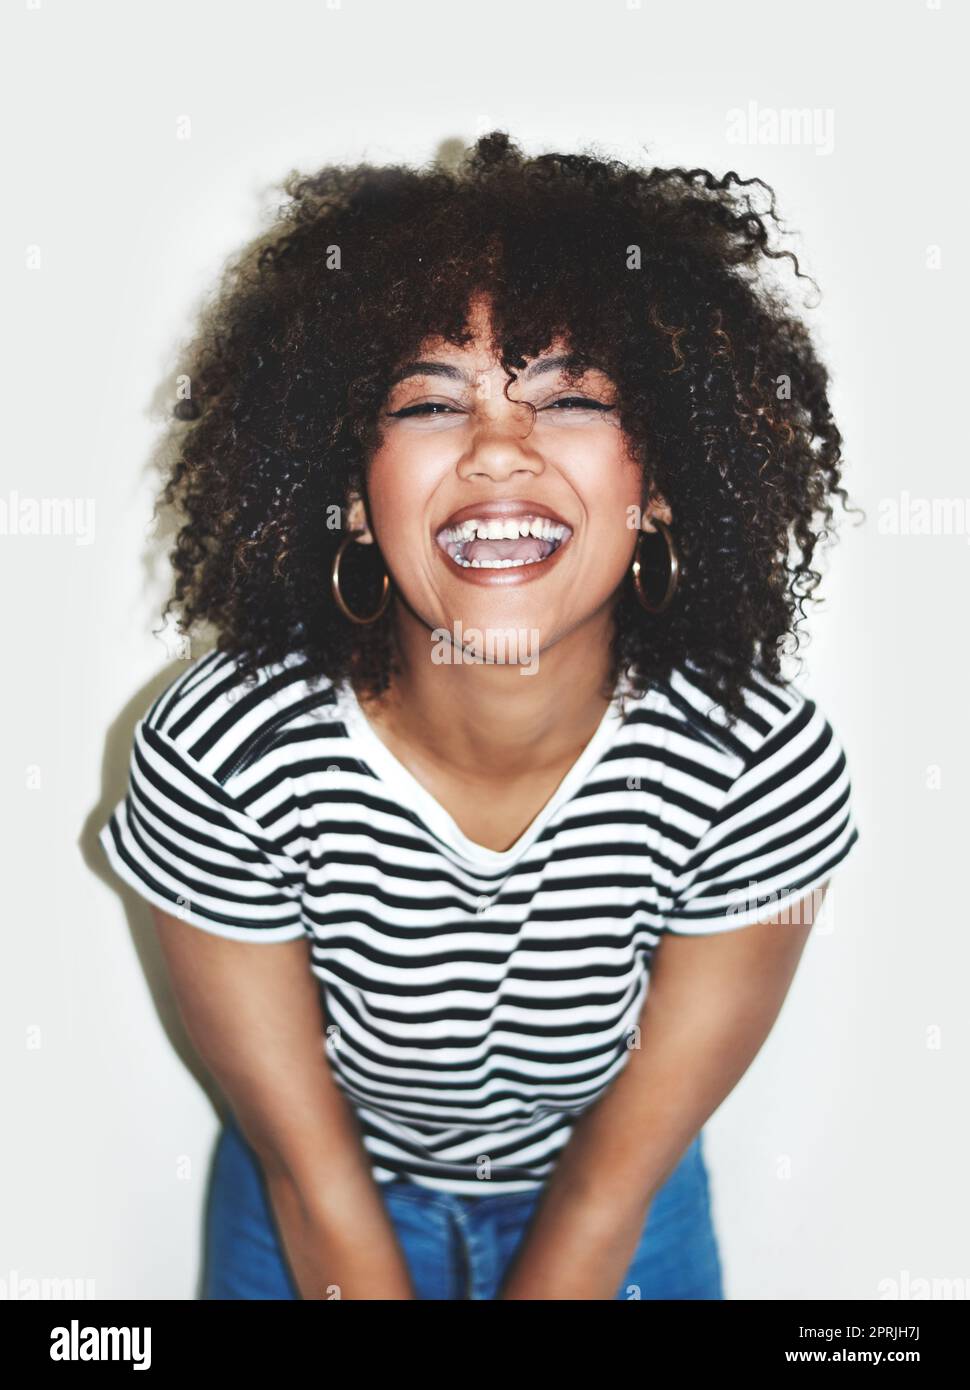 Bursting with happiness. Studio shot of a happy young woman posing against a gray background. Stock Photo